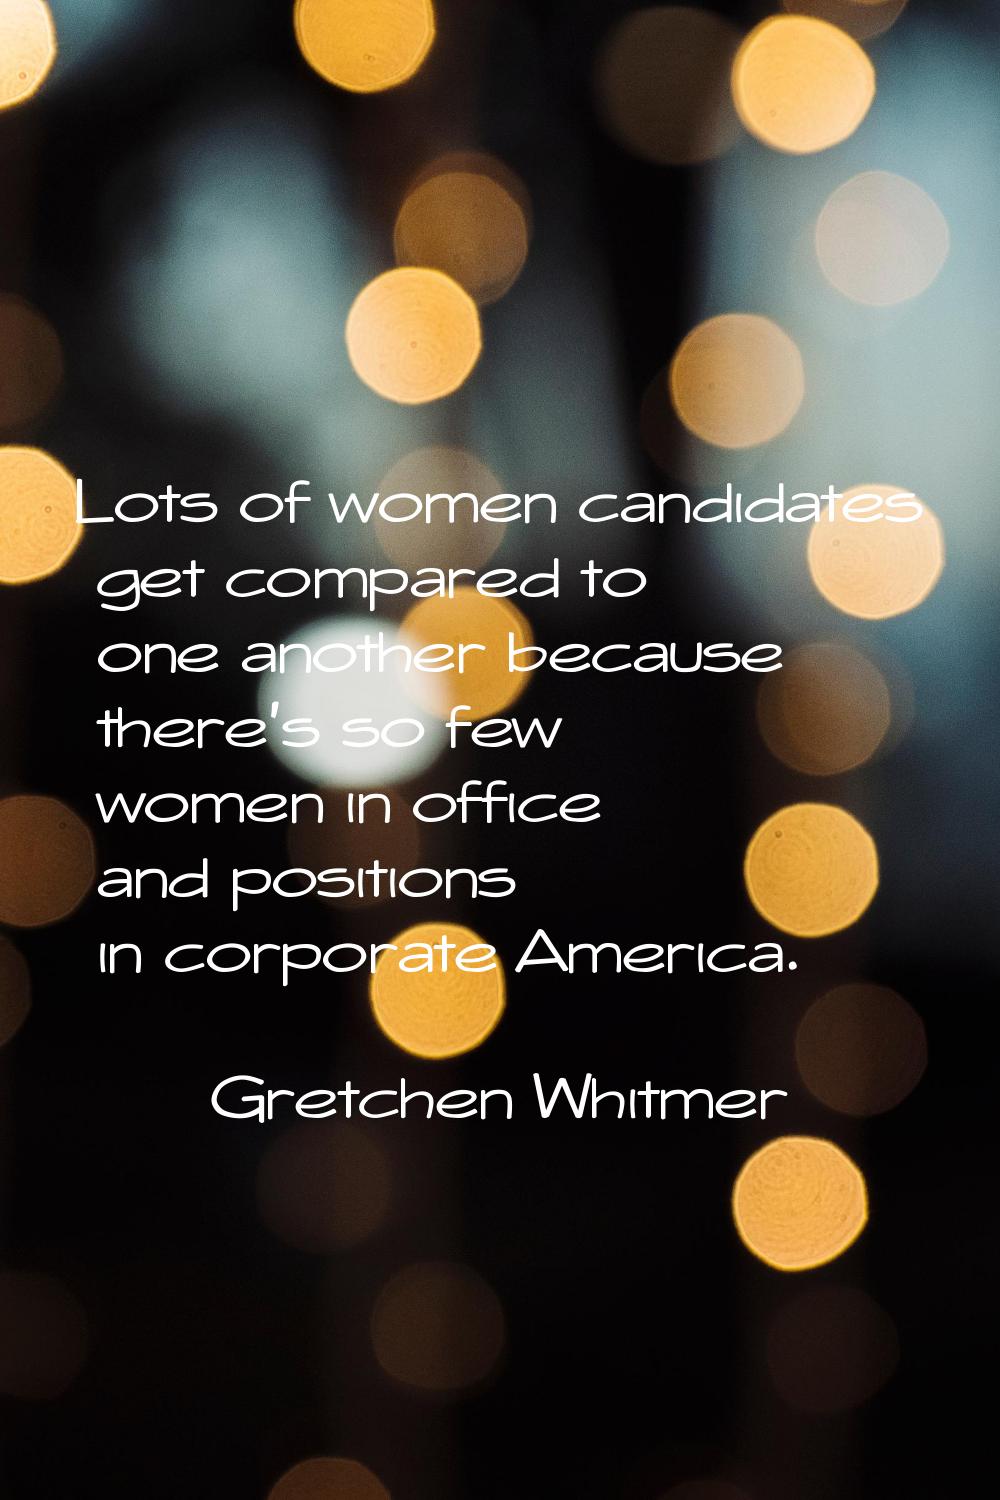 Lots of women candidates get compared to one another because there's so few women in office and pos